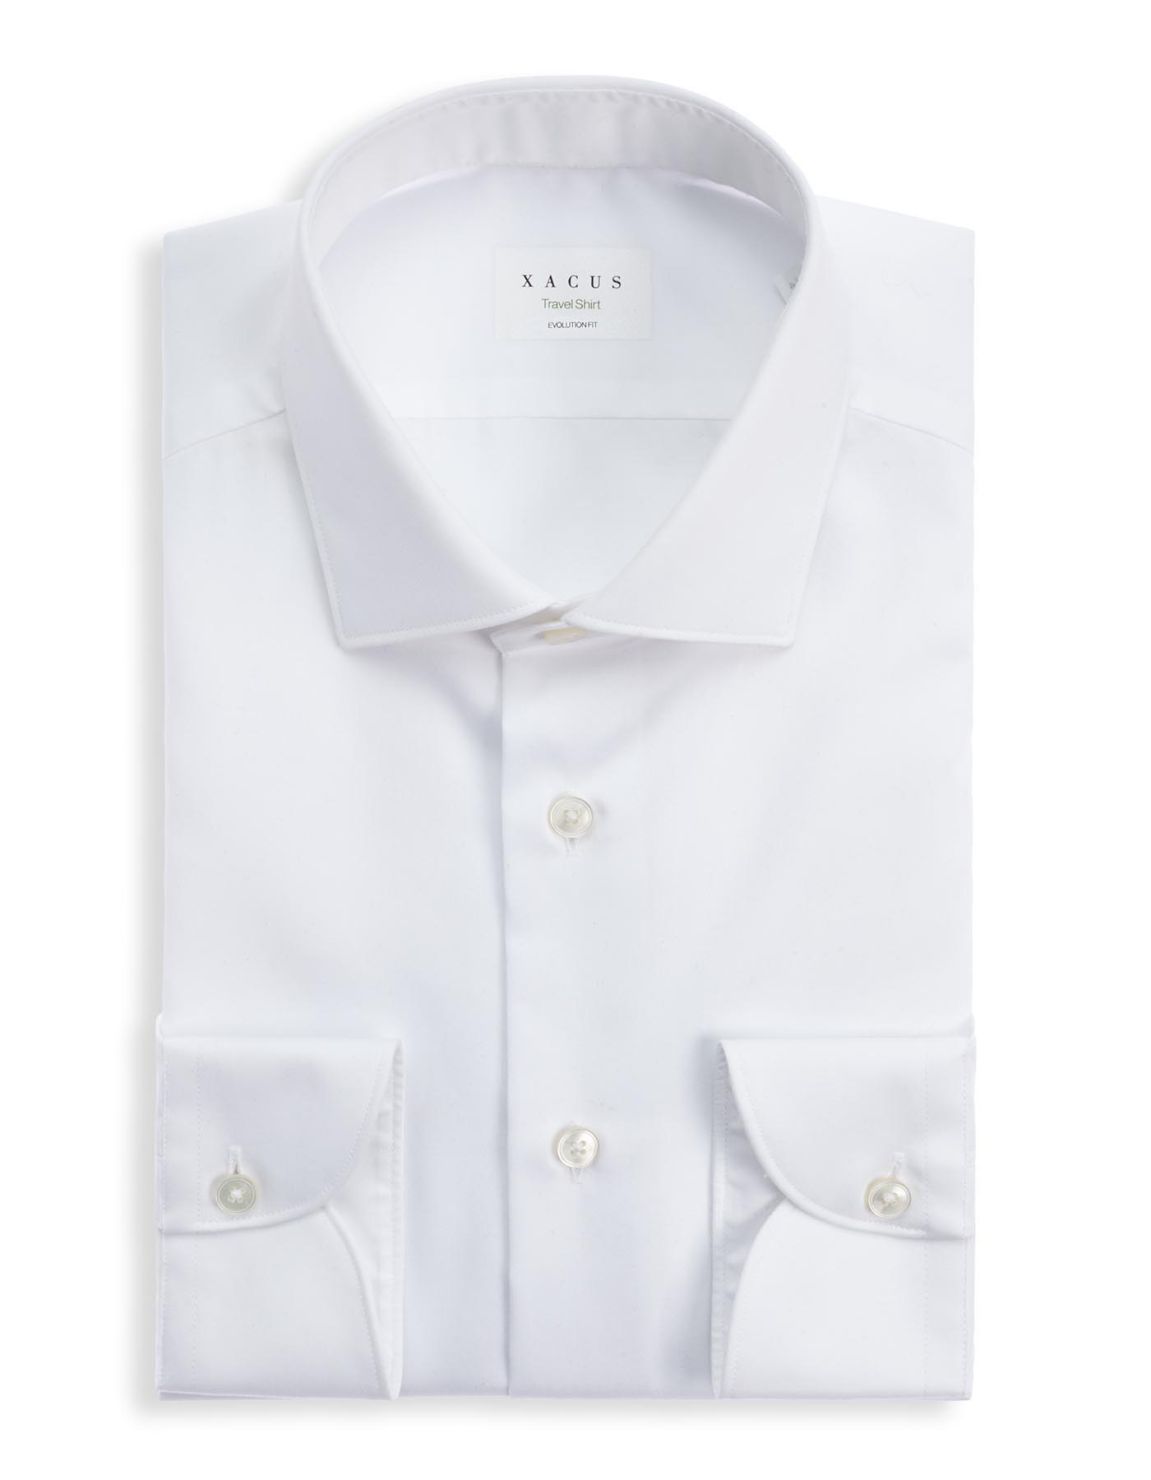 White Twill Solid colour Shirt Collar small cutaway Evolution Classic Fit 2